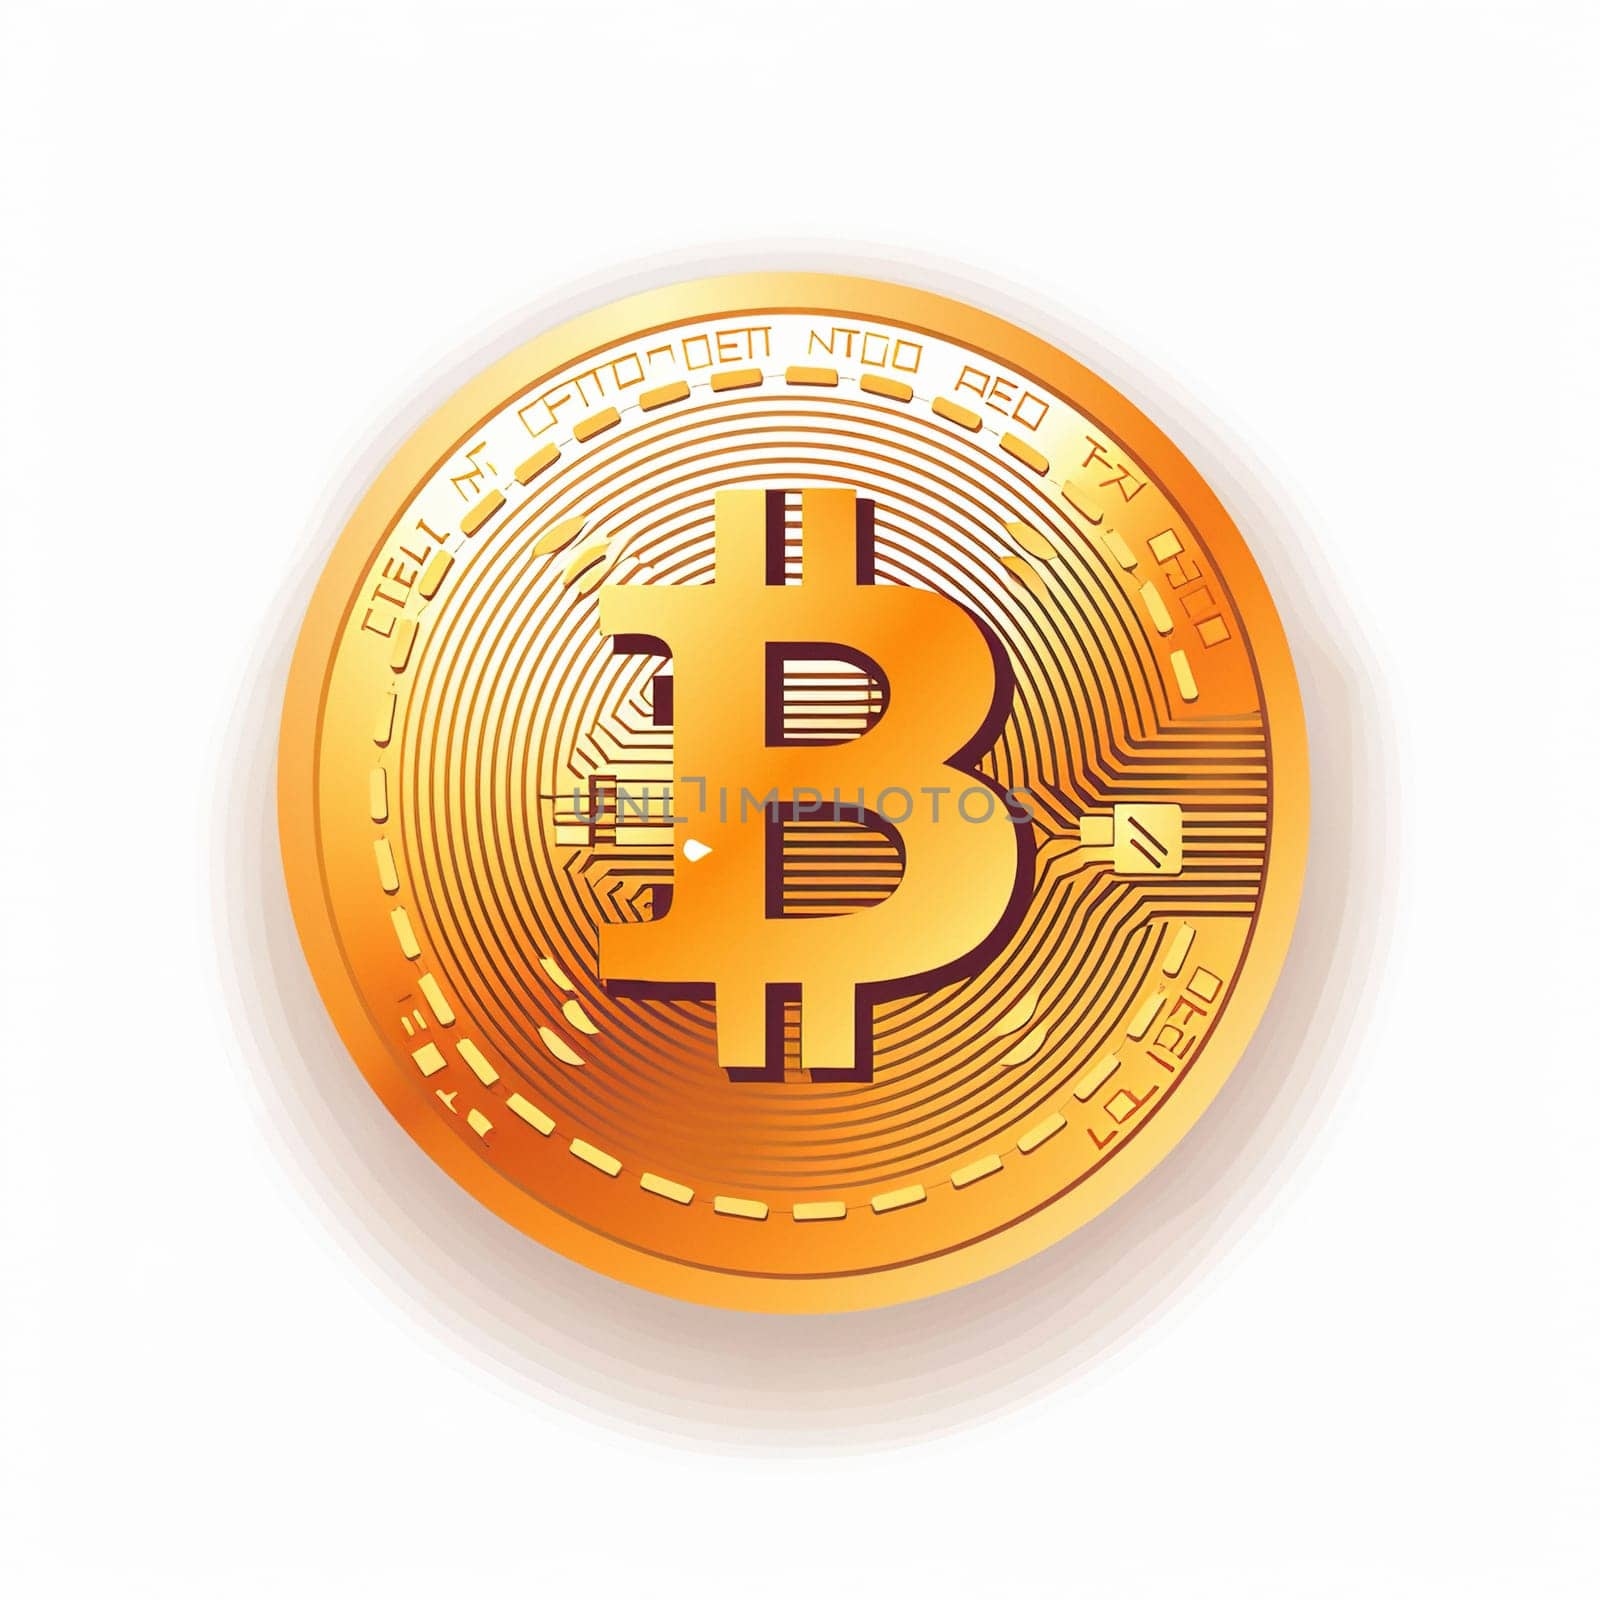 Bitcoin image isolated on white background for versatile usage in financial and cryptocurrency related designs by igor010